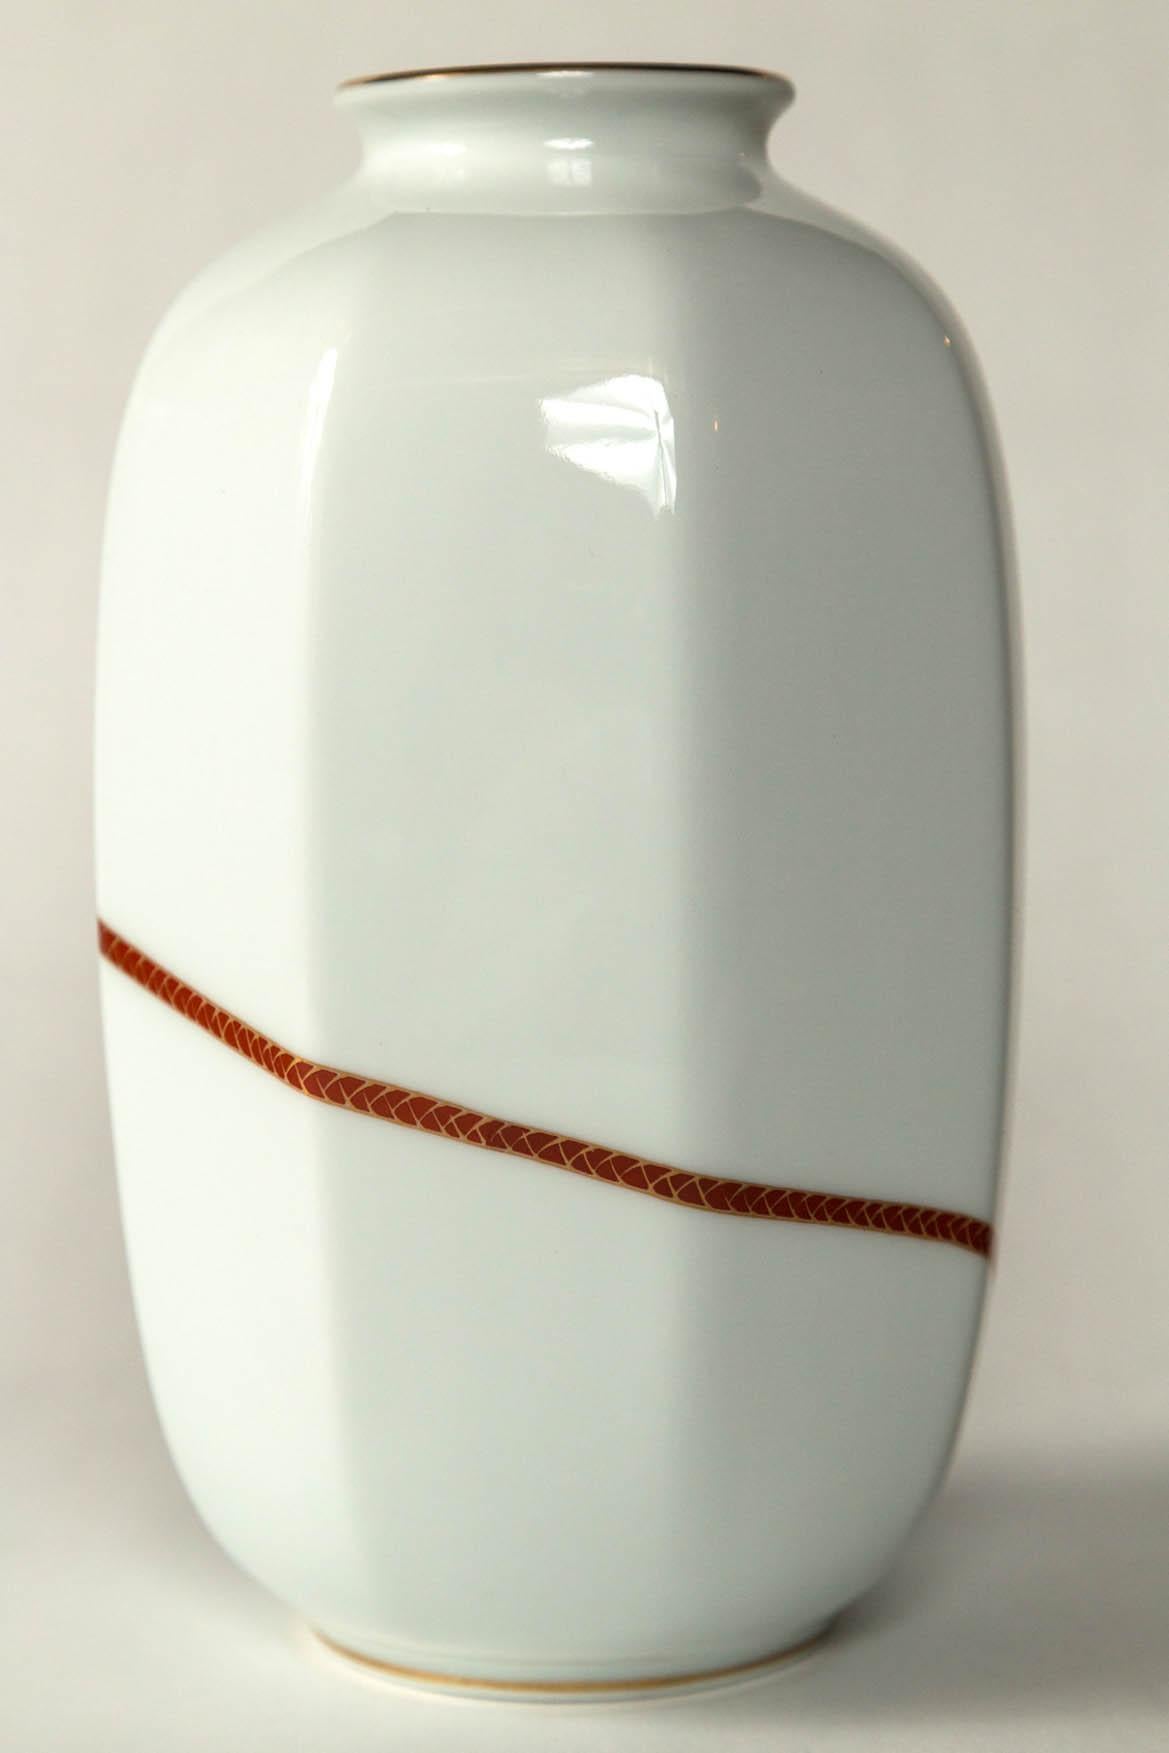 Aritaware Porcelain Vase, Fukagawa, Japan, 20th Century In Good Condition For Sale In Chappaqua, NY